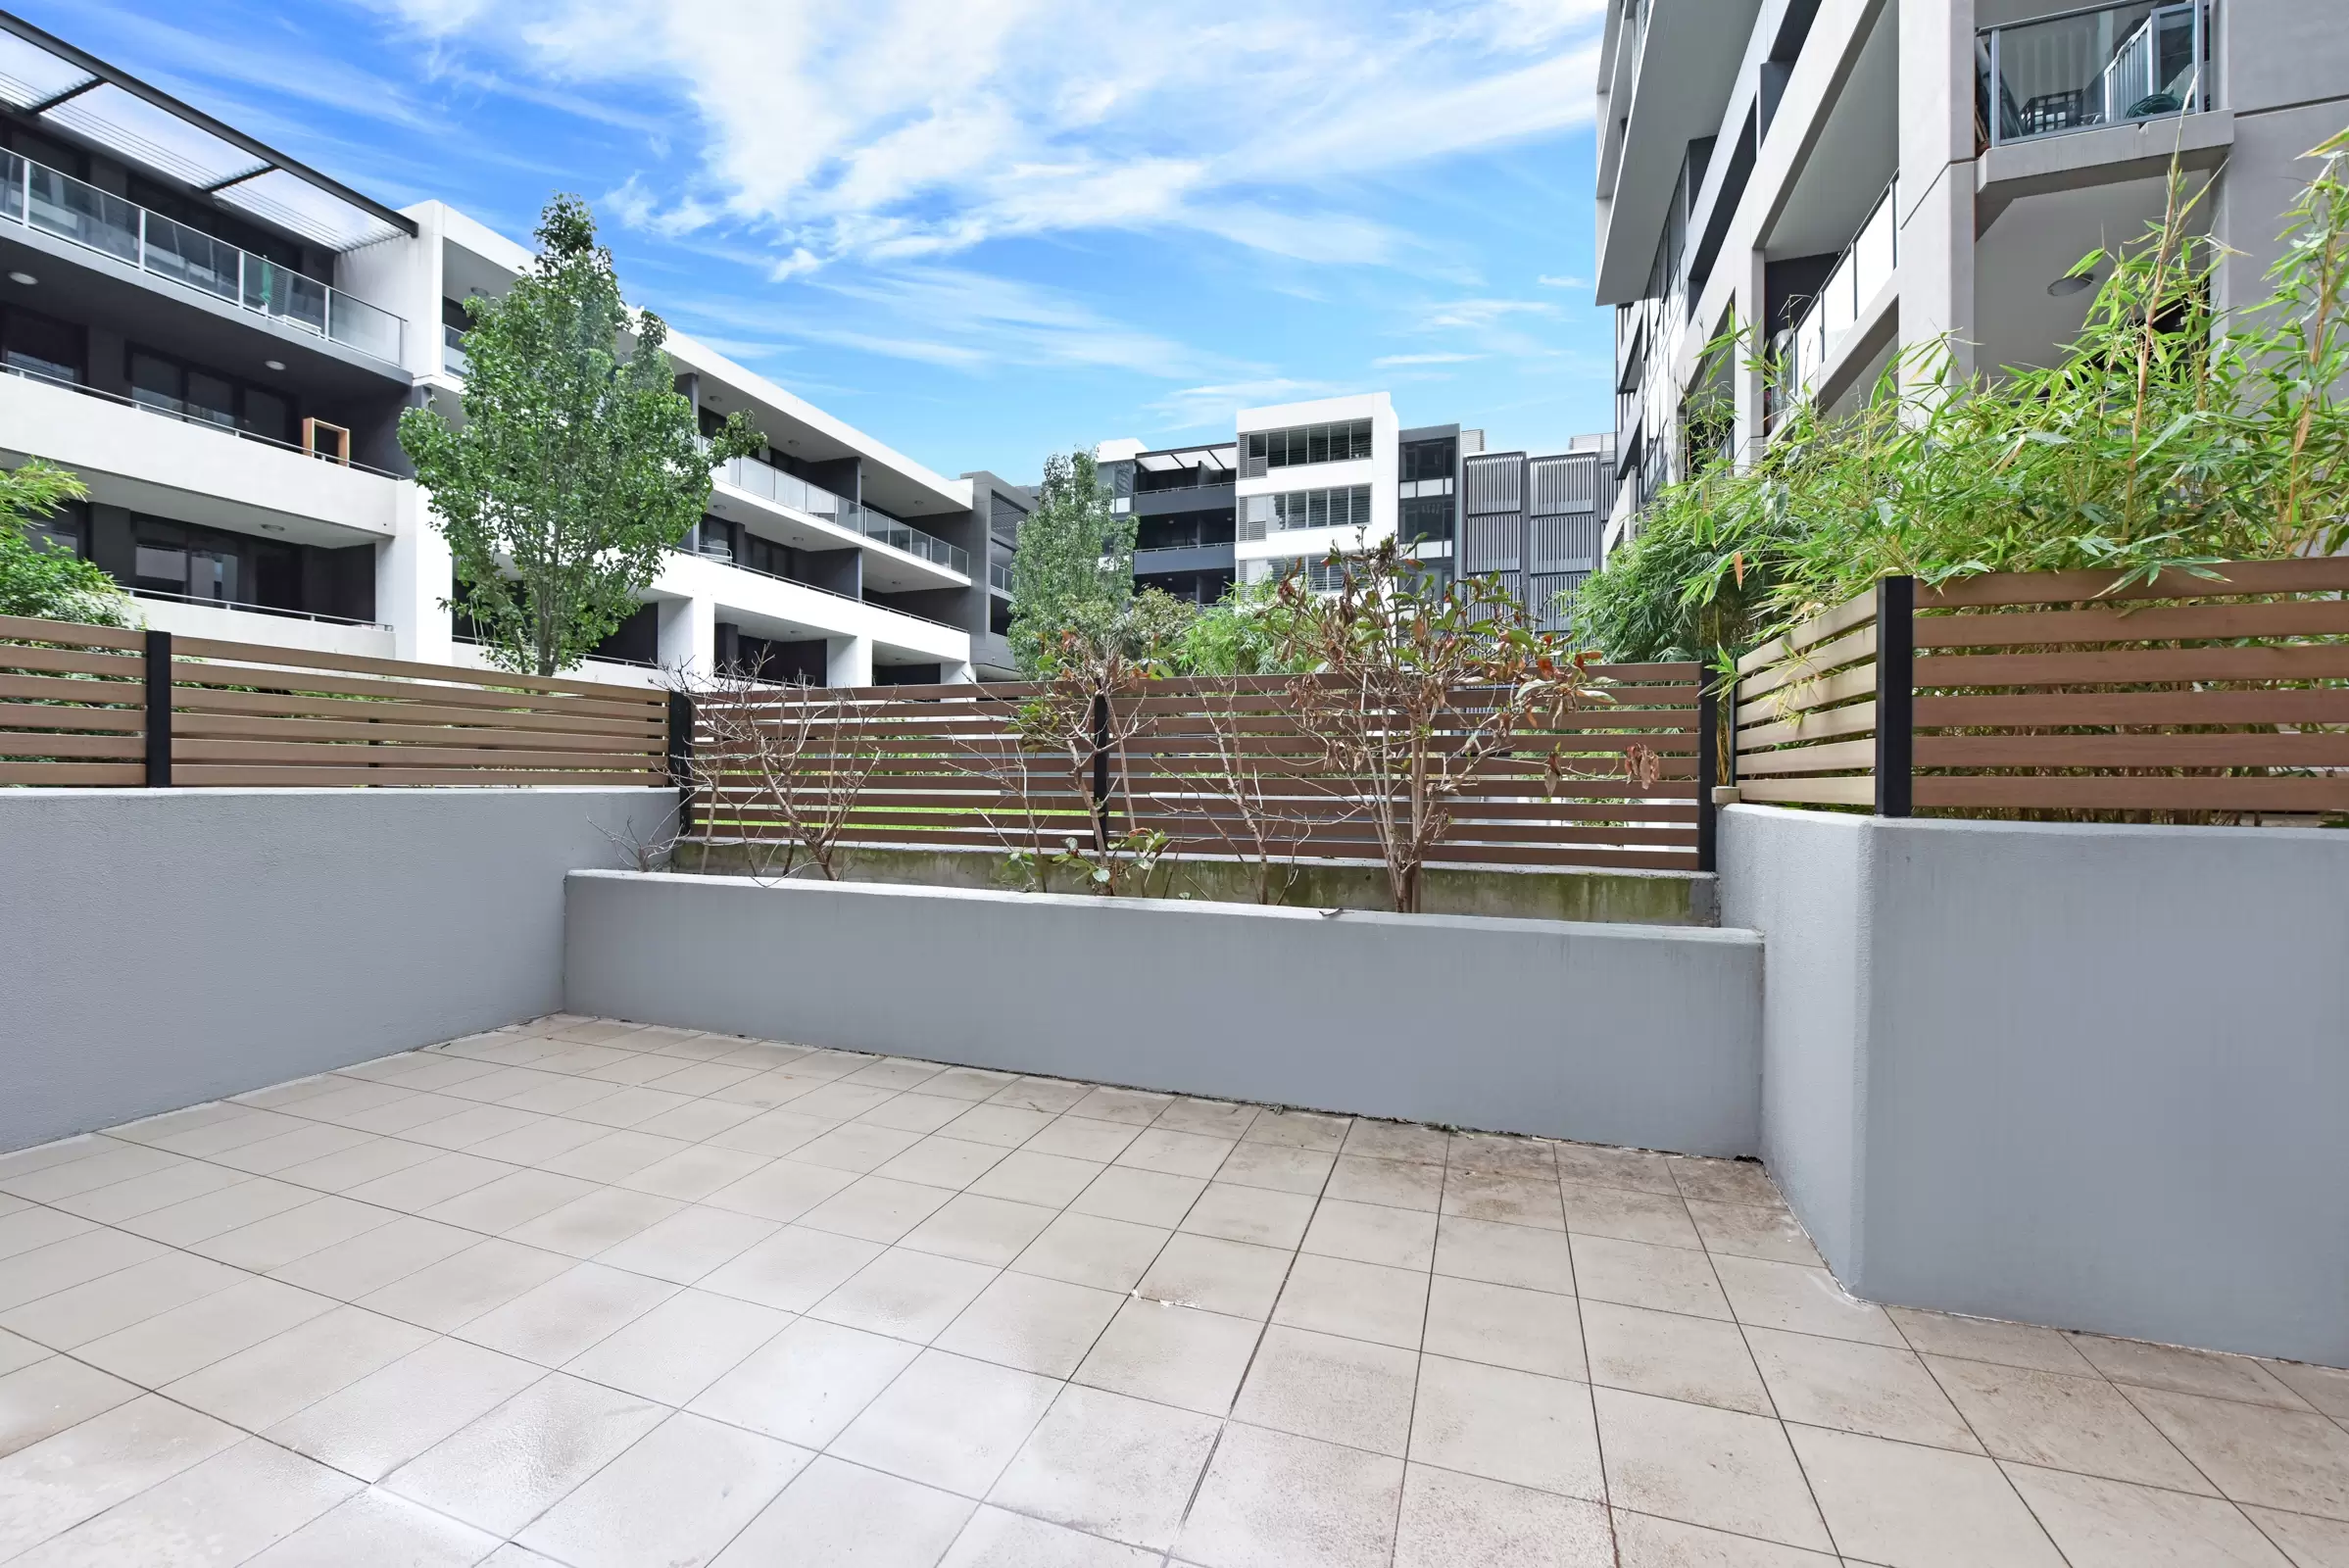 309/3 Waterways Street, Wentworth Point Leased by Chidiac Realty - image 2